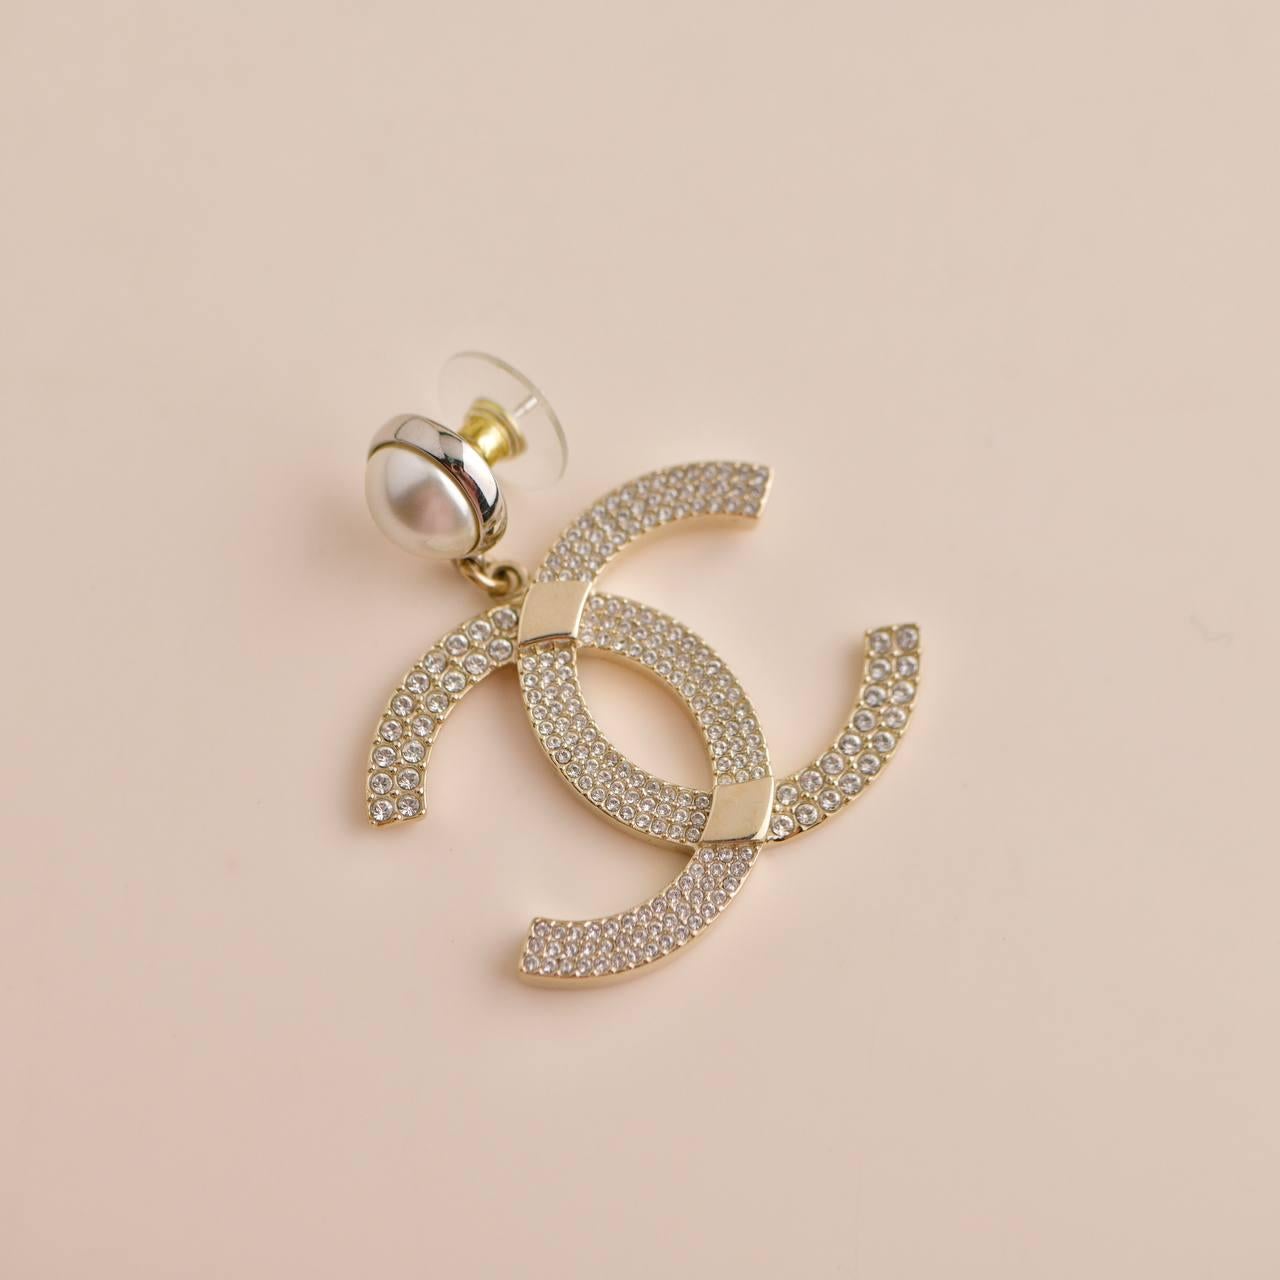 Women's Chanel CC Faux Pearl Earrings From The 2021 Collection For Sale